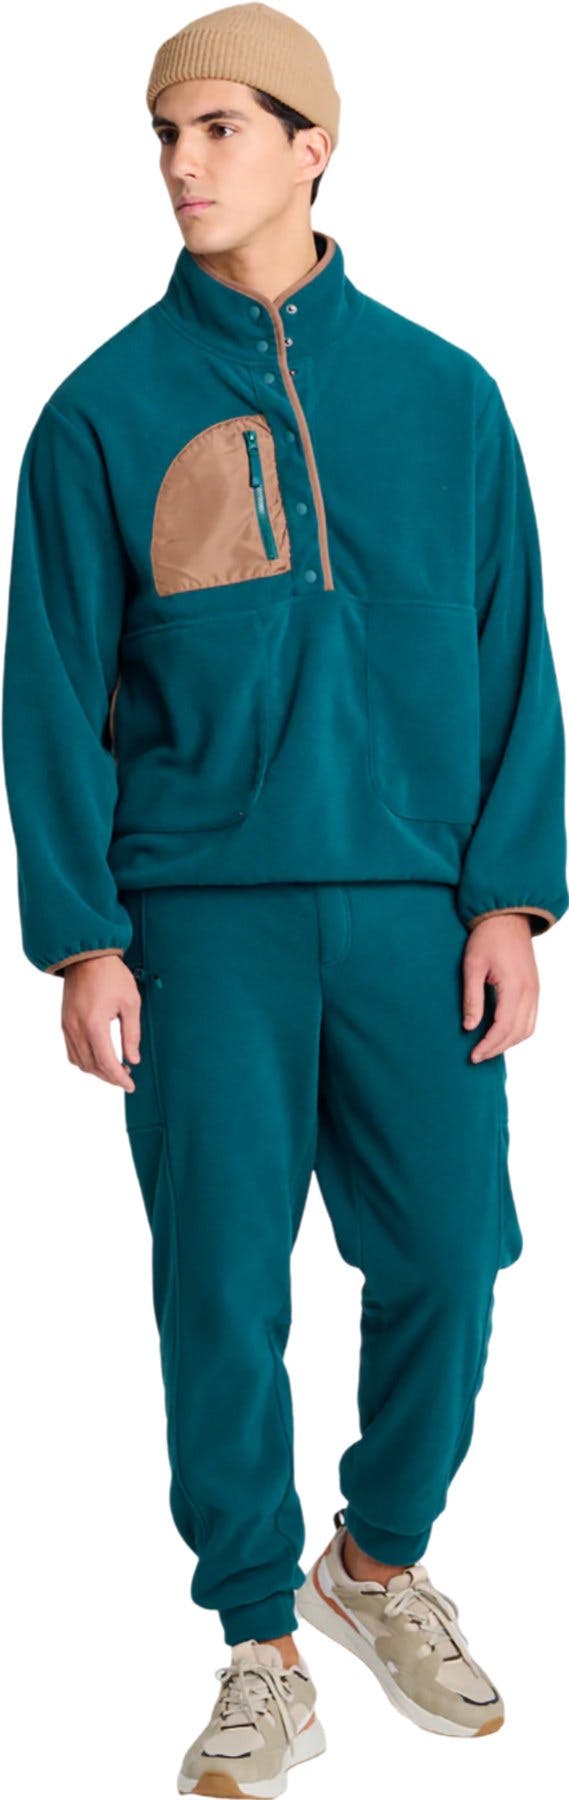 Product image for Recycled Polar Jacket - Men's